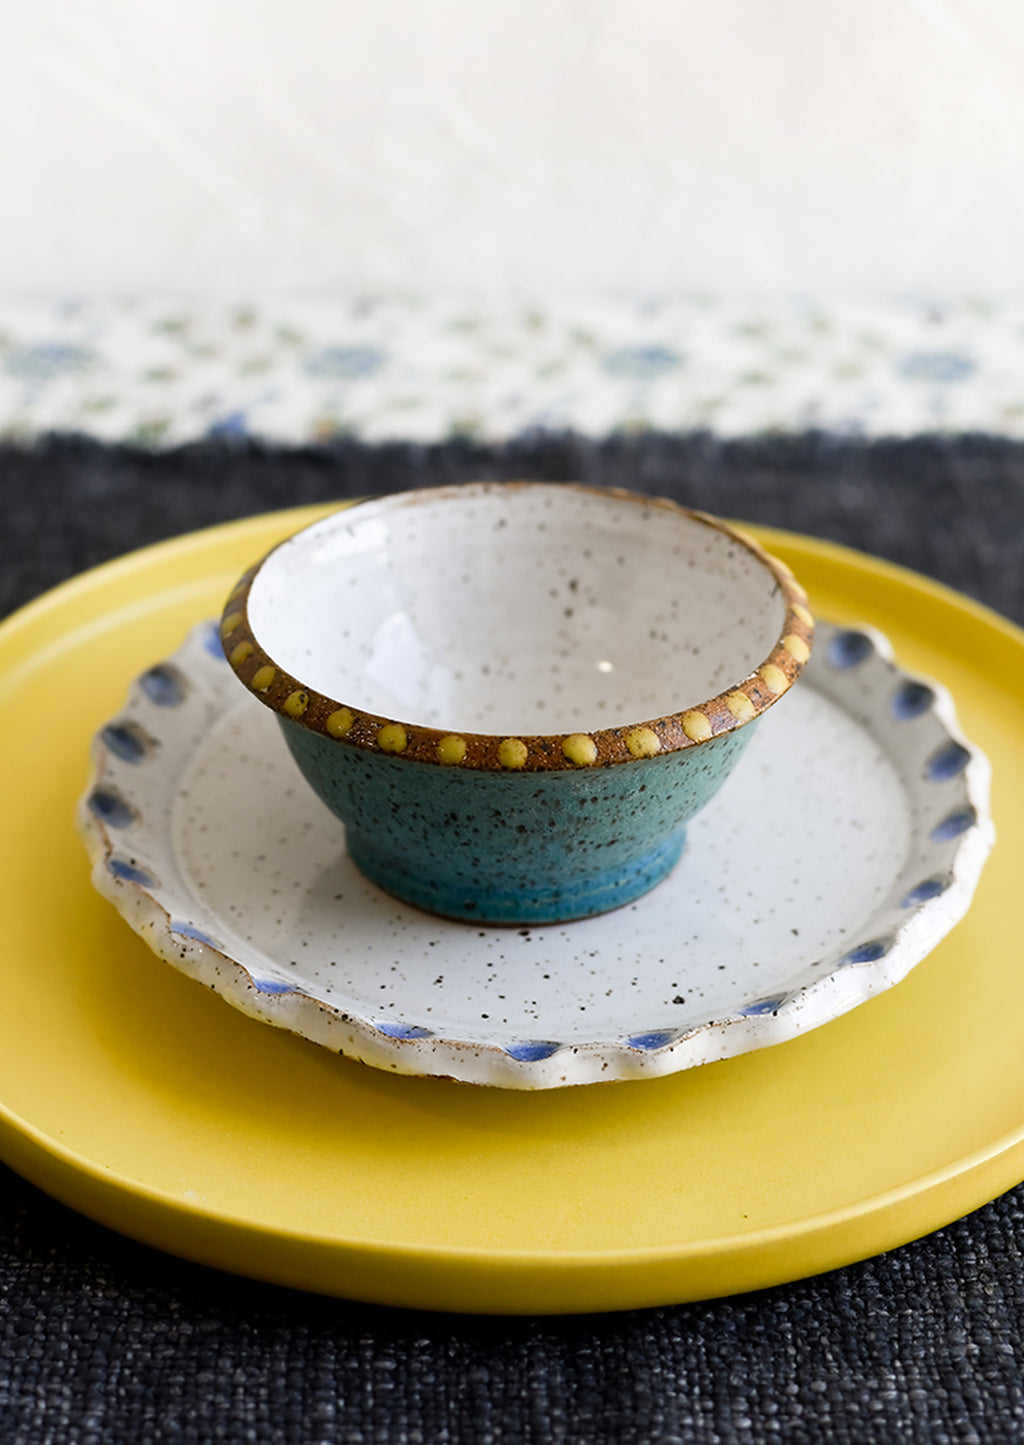 3: A small turquoise ceramic bowl with yellow dot painted detailing.